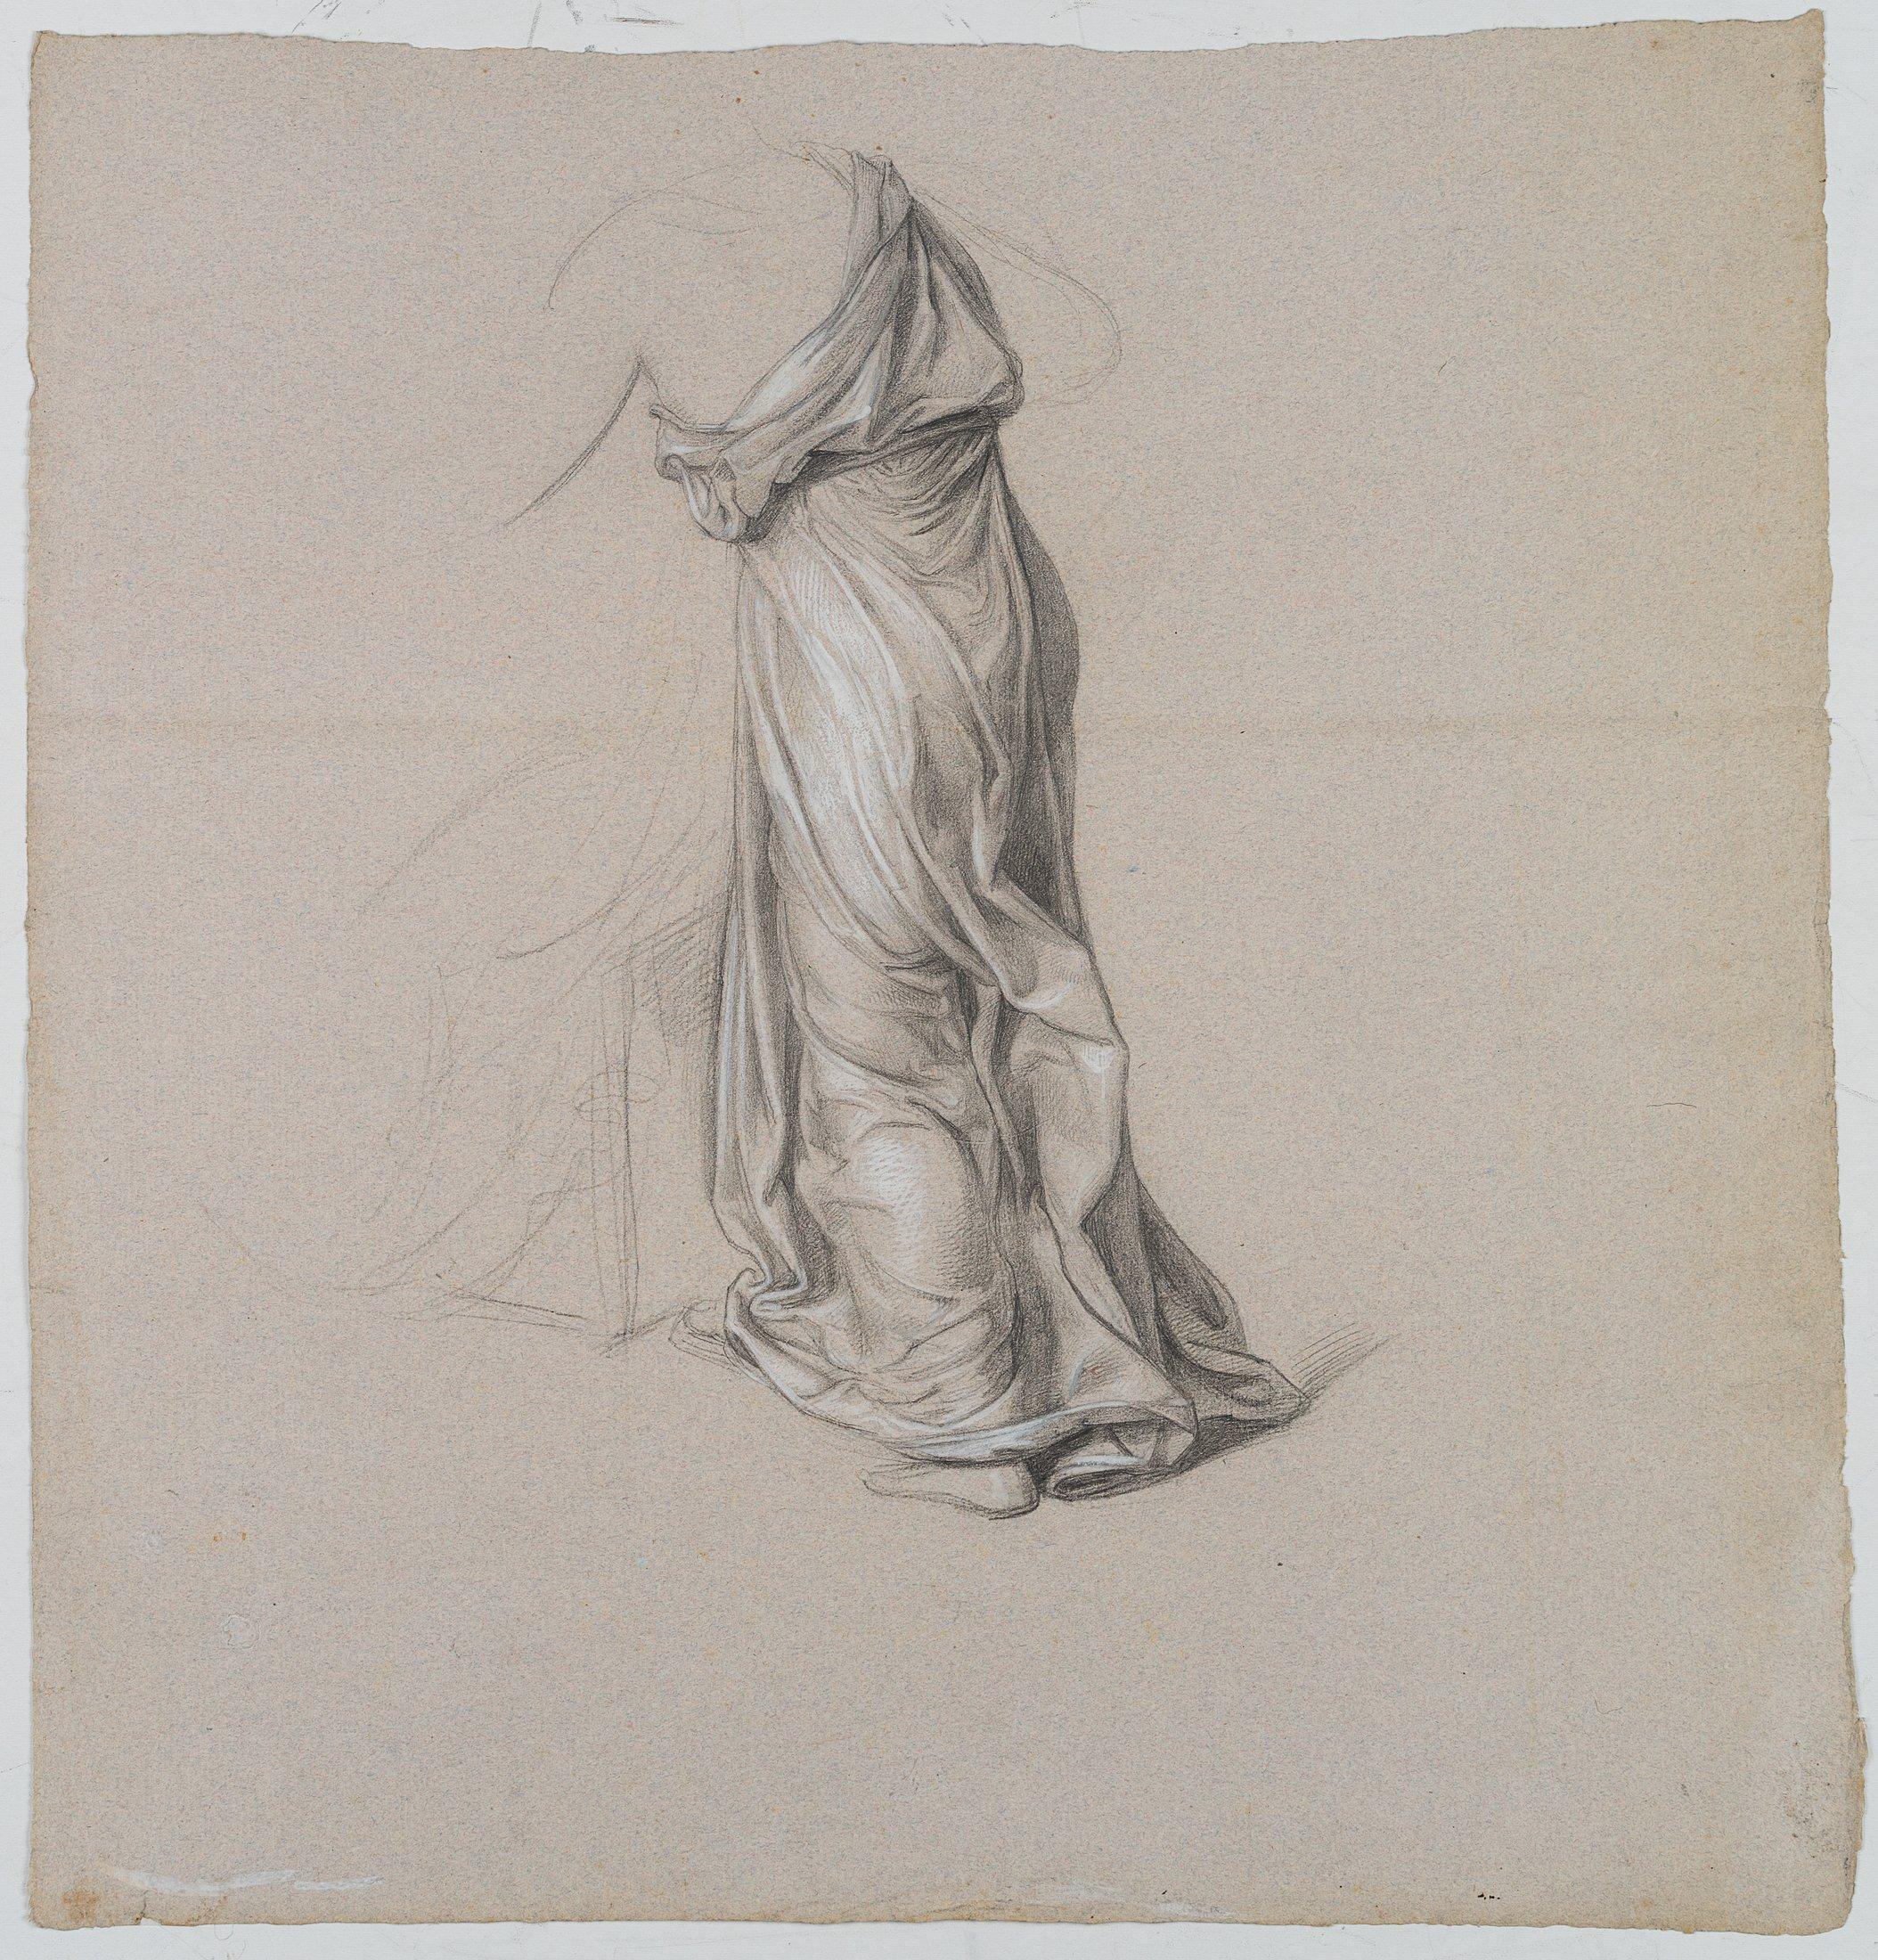 Trajan Wallis (1794 Florence - 1892 ): Study of a robe on a female figure in back view, 19th century, Pencil

Technique: White heightened Pencil on Paper

Date: 19th century

Description:  Watermark: Shield of arms with initials 